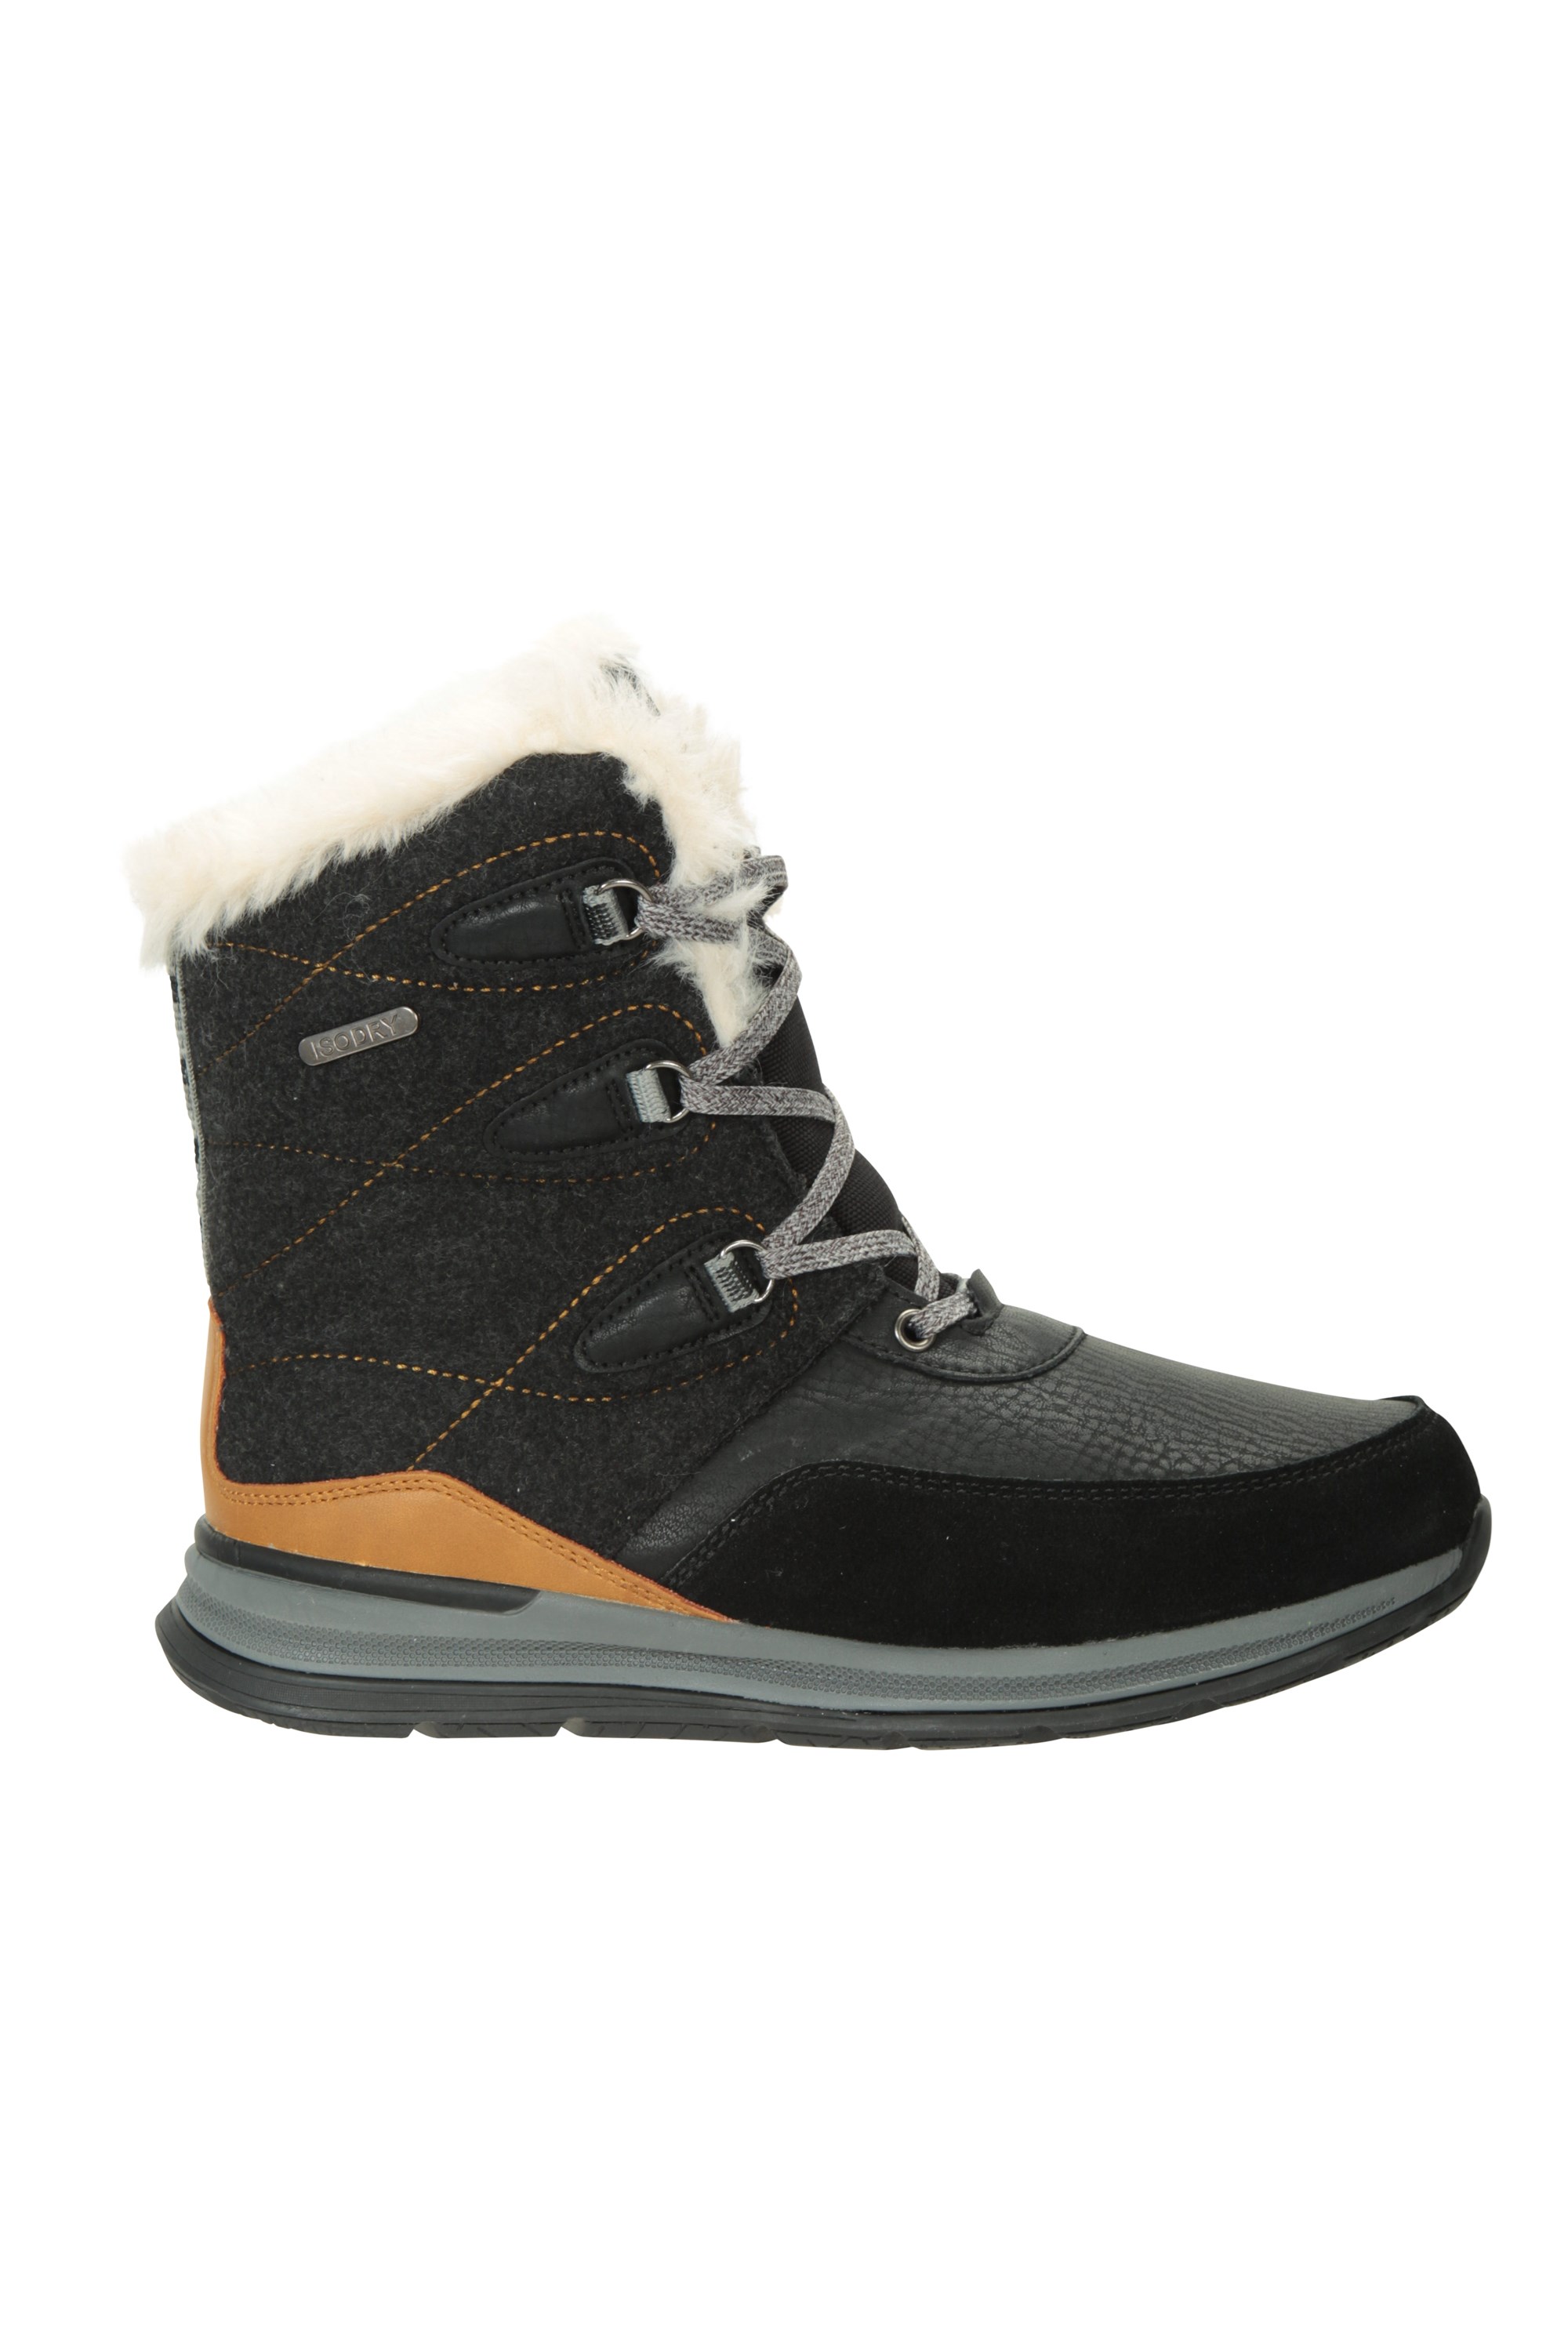 Mountain Warehouse Womens Waterproof Snow Boots with Textile Upper and Warm 